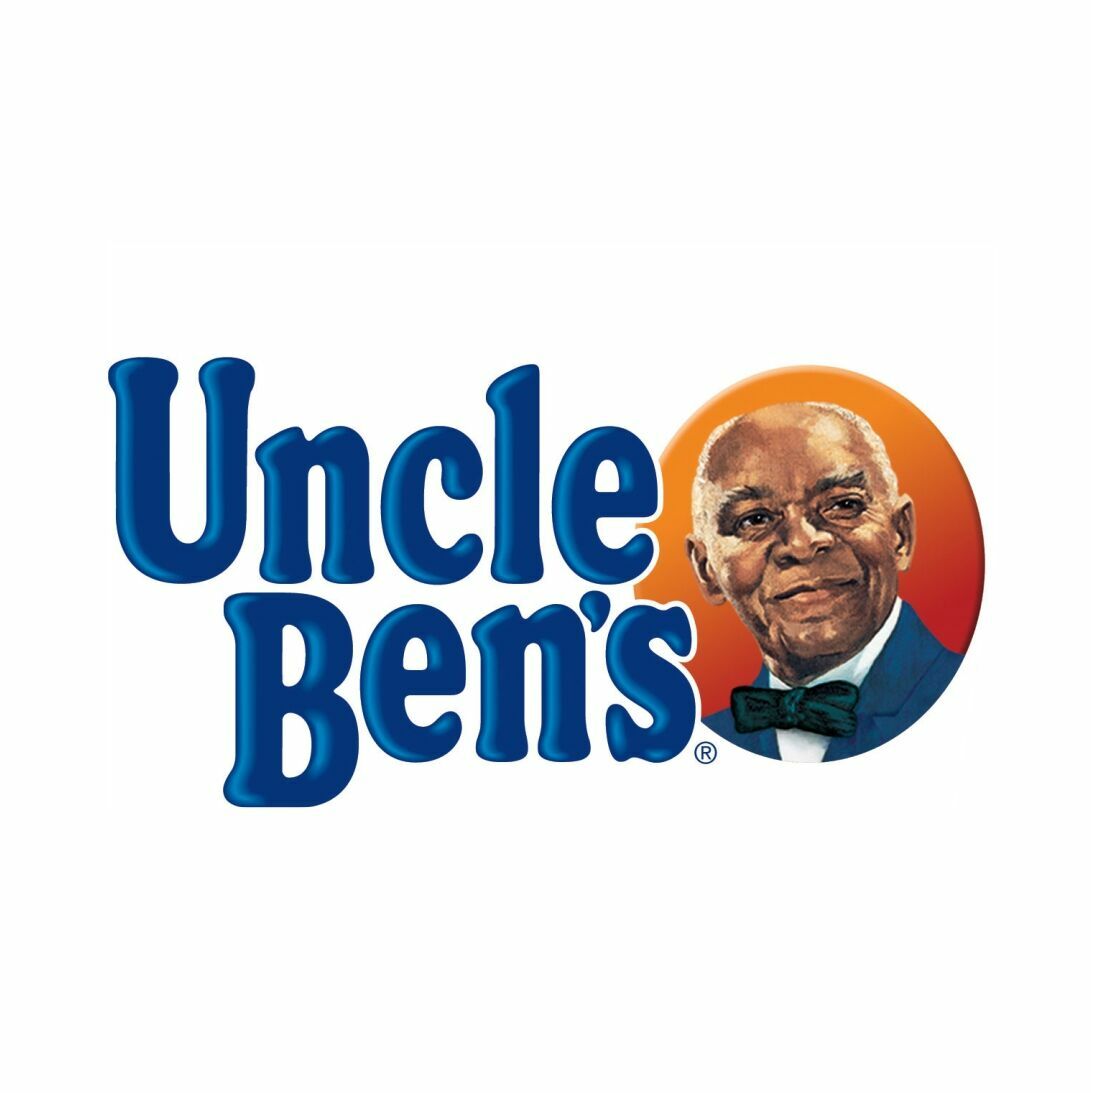 Amid the racial protests Uncle Ben's brand will change the logo with African-American